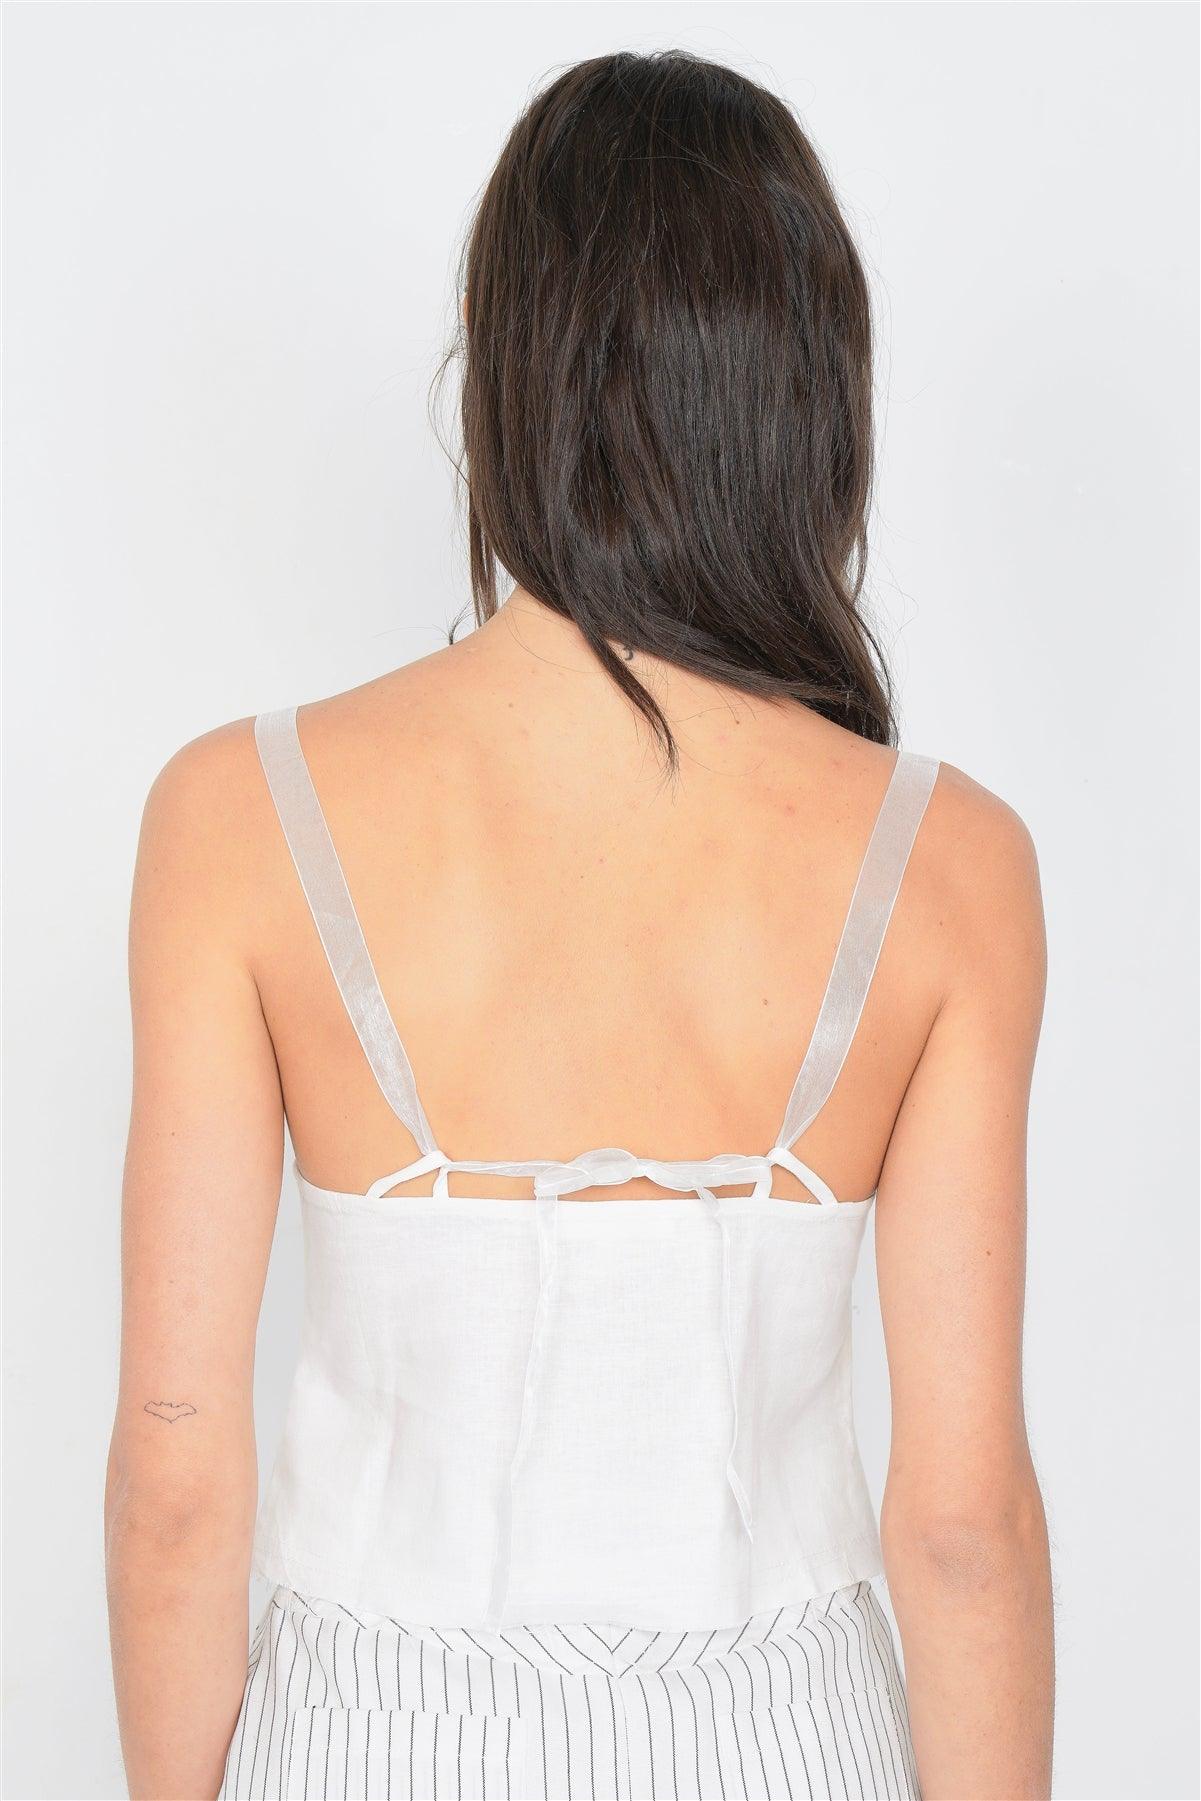 Off-White Hook & Eye Bustier Corset Sheer Cami Strap Chic Top